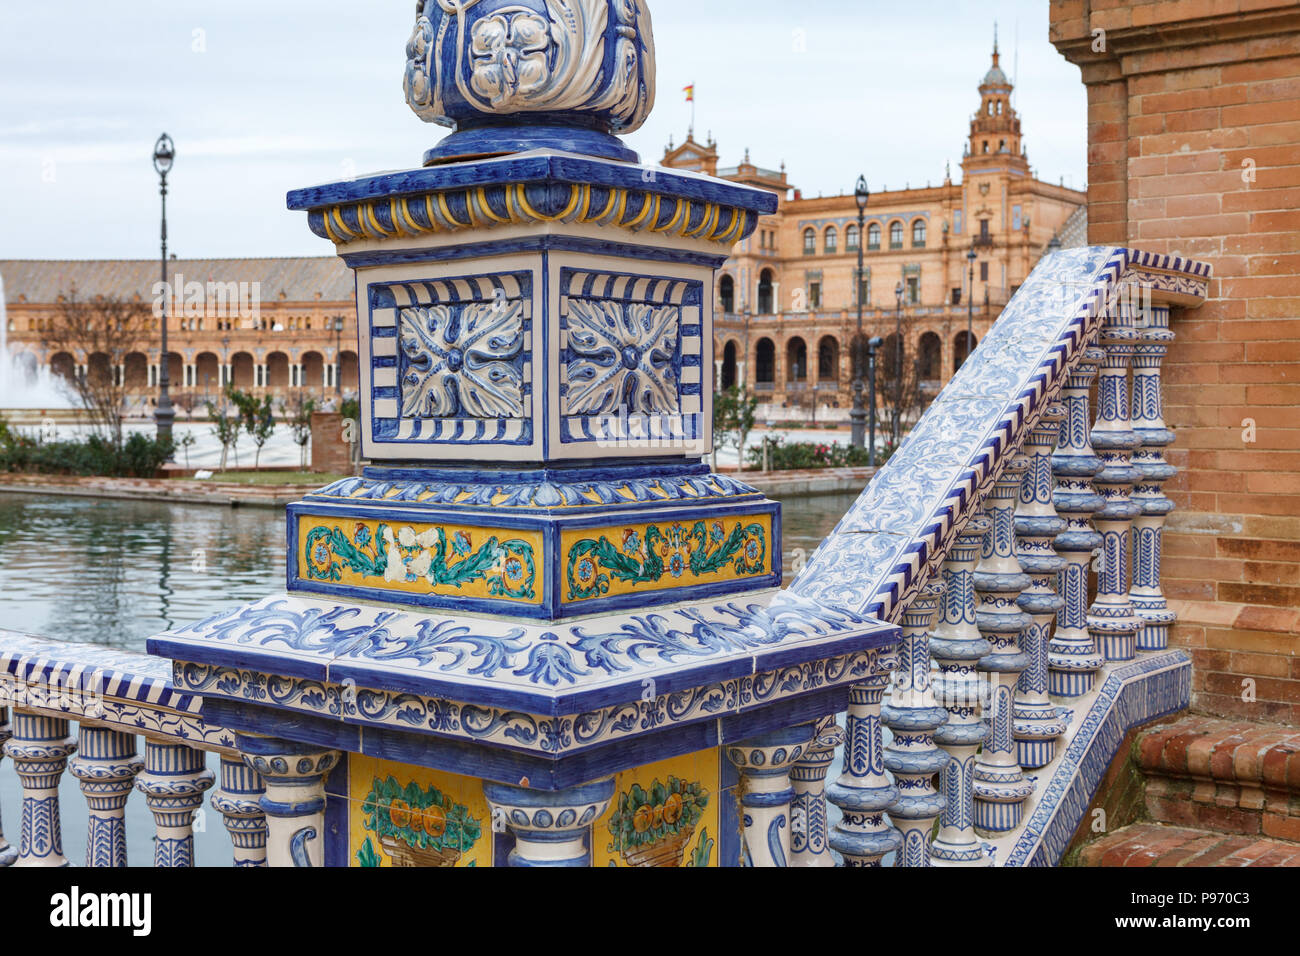 Balustrade on Plaza de Espana (Spain Square) in Seville, Andalusia, Spain.  Decorated with mixing elements of the Renaissance Revival and Moorish Revi Stock Photo